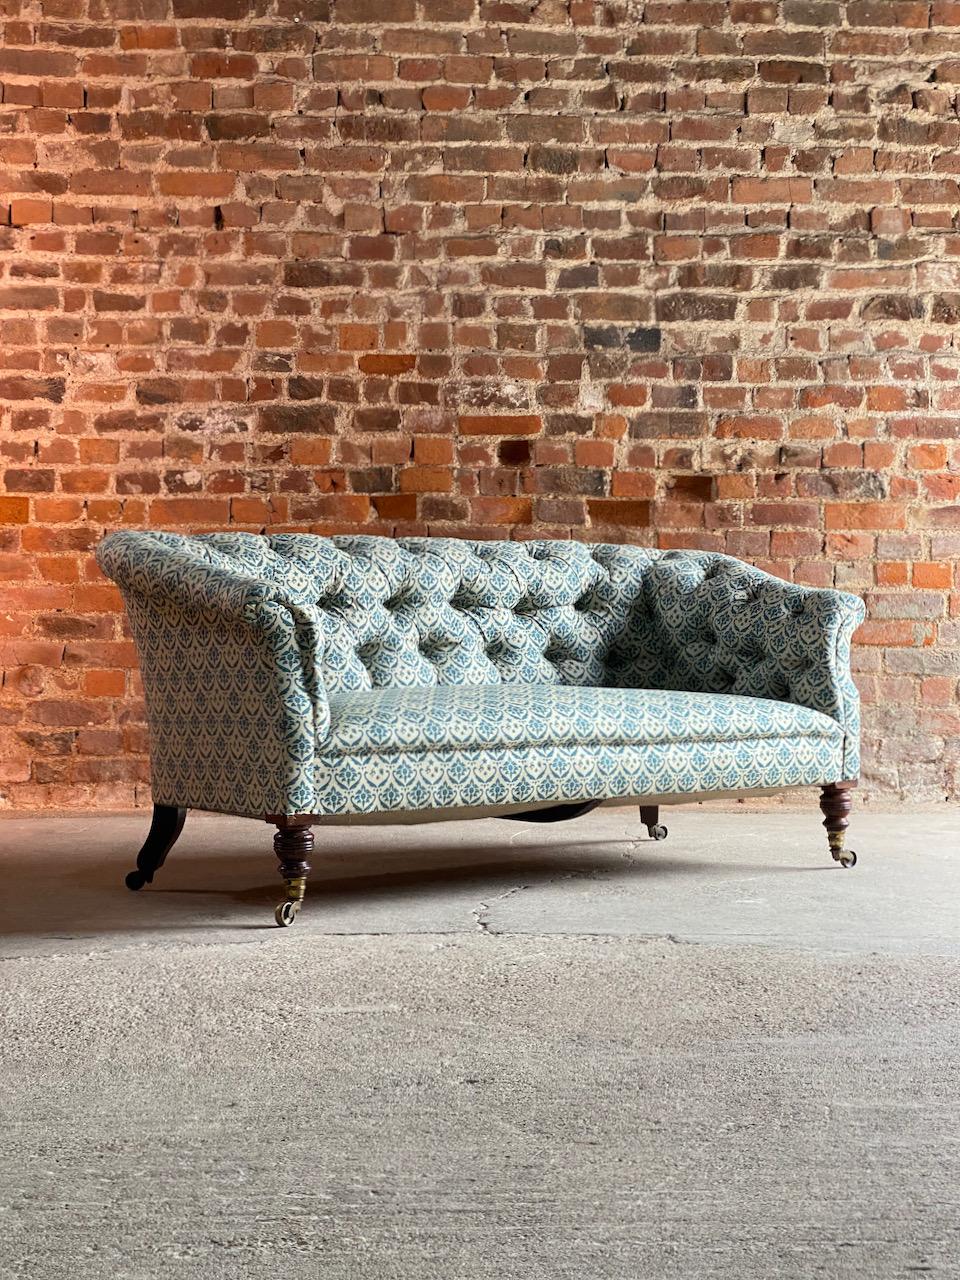 Howard & Sons chesterfield sofa 19th century circa 1850 no: 2

Magnificent early 19th century Howard & Sons chesterfield button back settee England circa 1850, superb petit and elegant country house sofa, the tufted seat back with bolstered seat